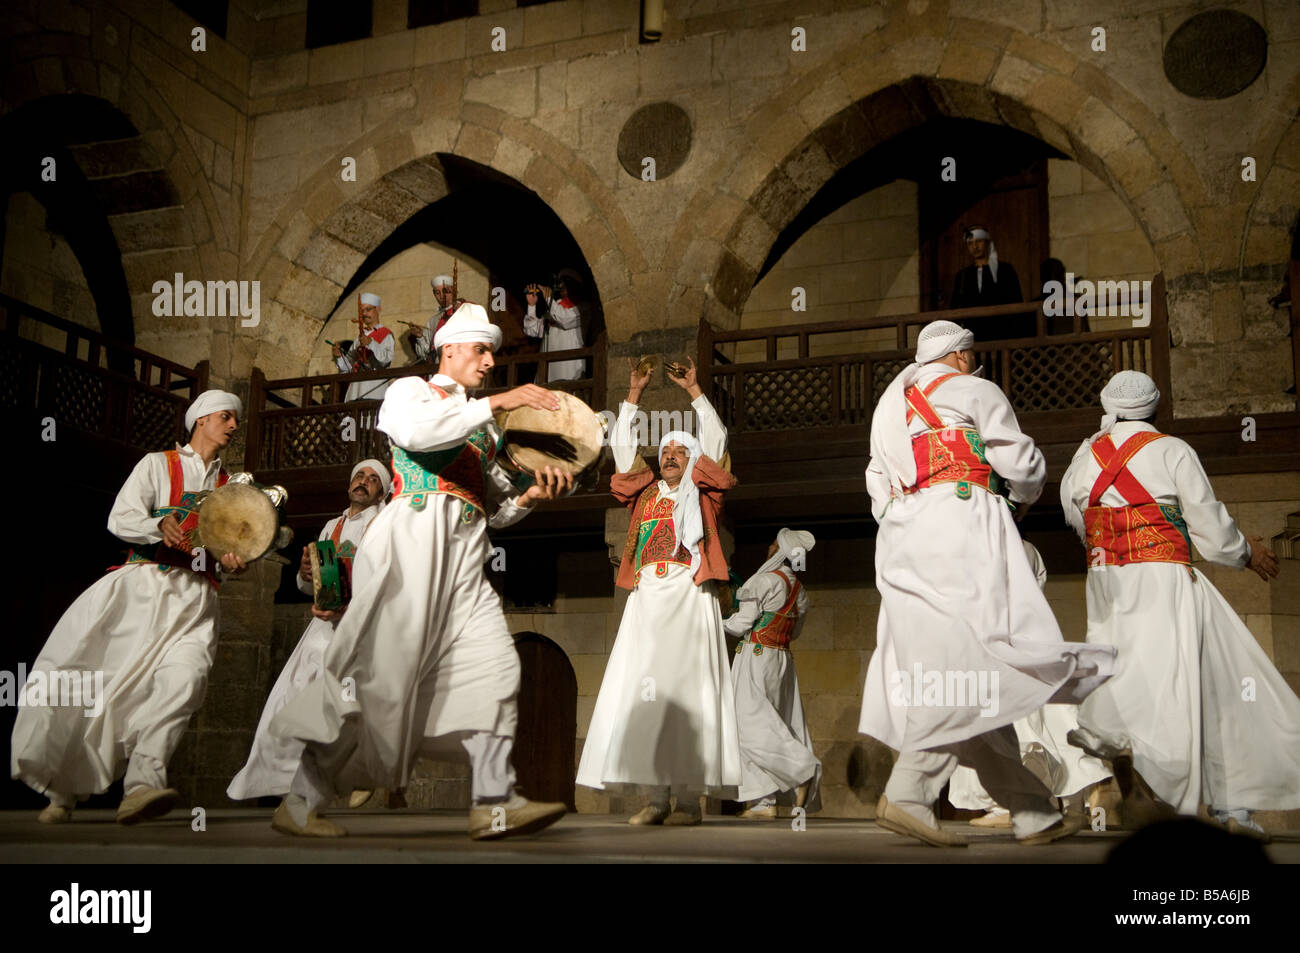 Dervish or Darvish performance of al tannoura Egyptian heritage dance troupe at the Wekalet el Ghouri Arts Center in Old Cairo Egypt Stock Photo